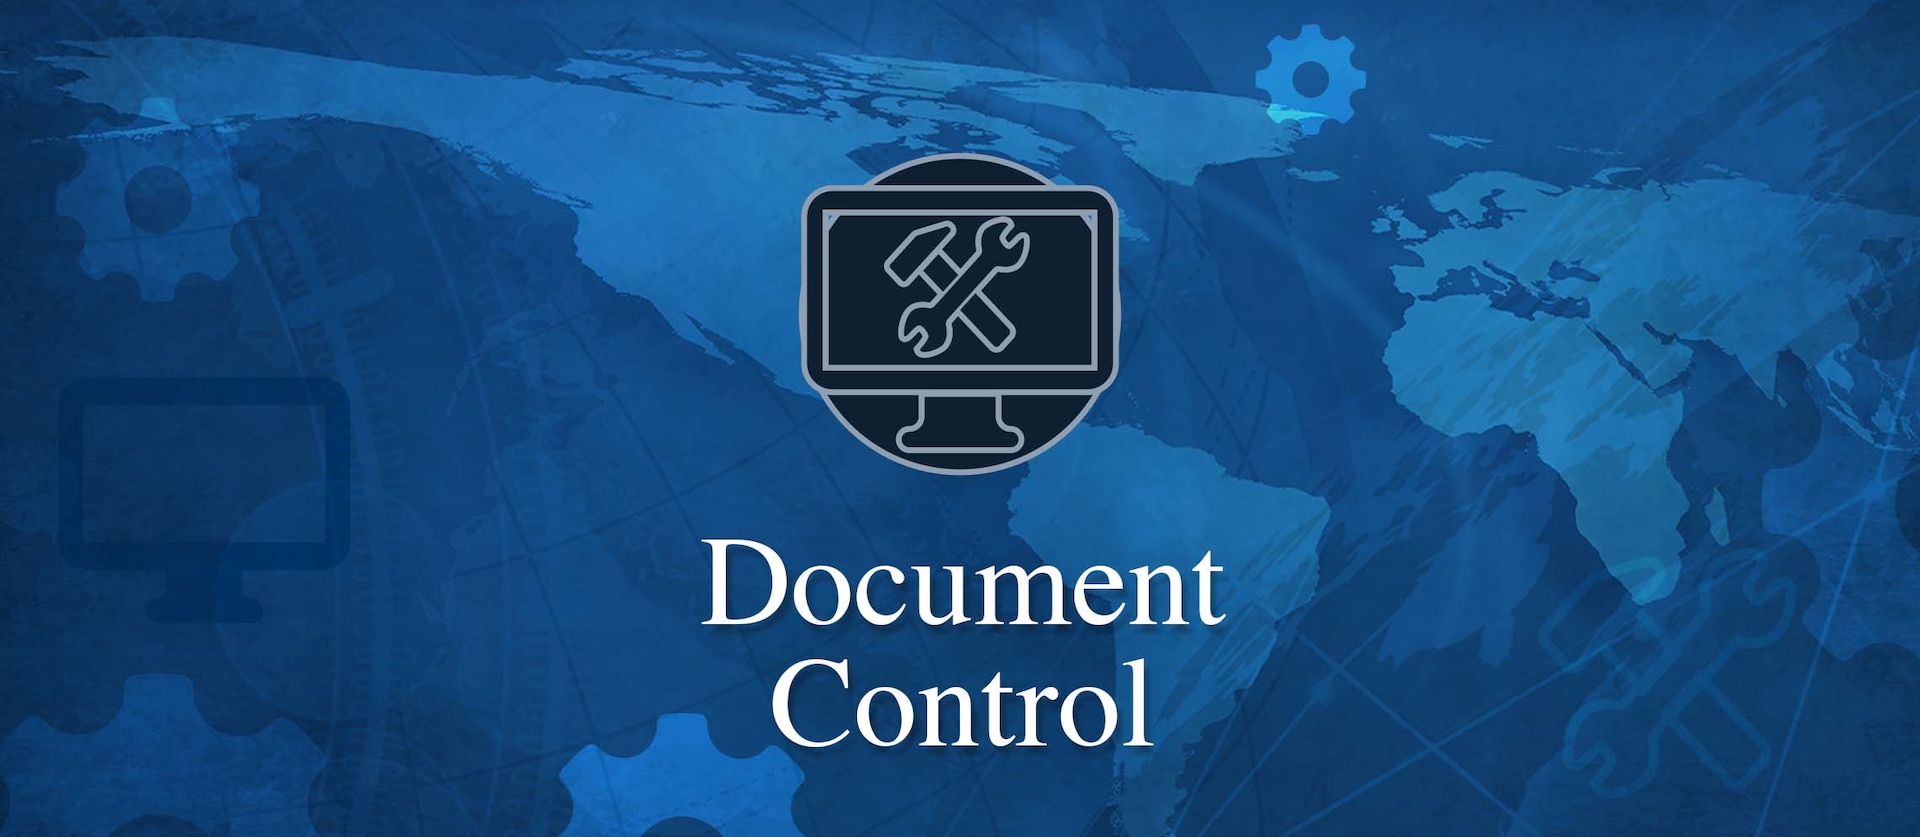 Banner for Land and Maritime Document Control Application